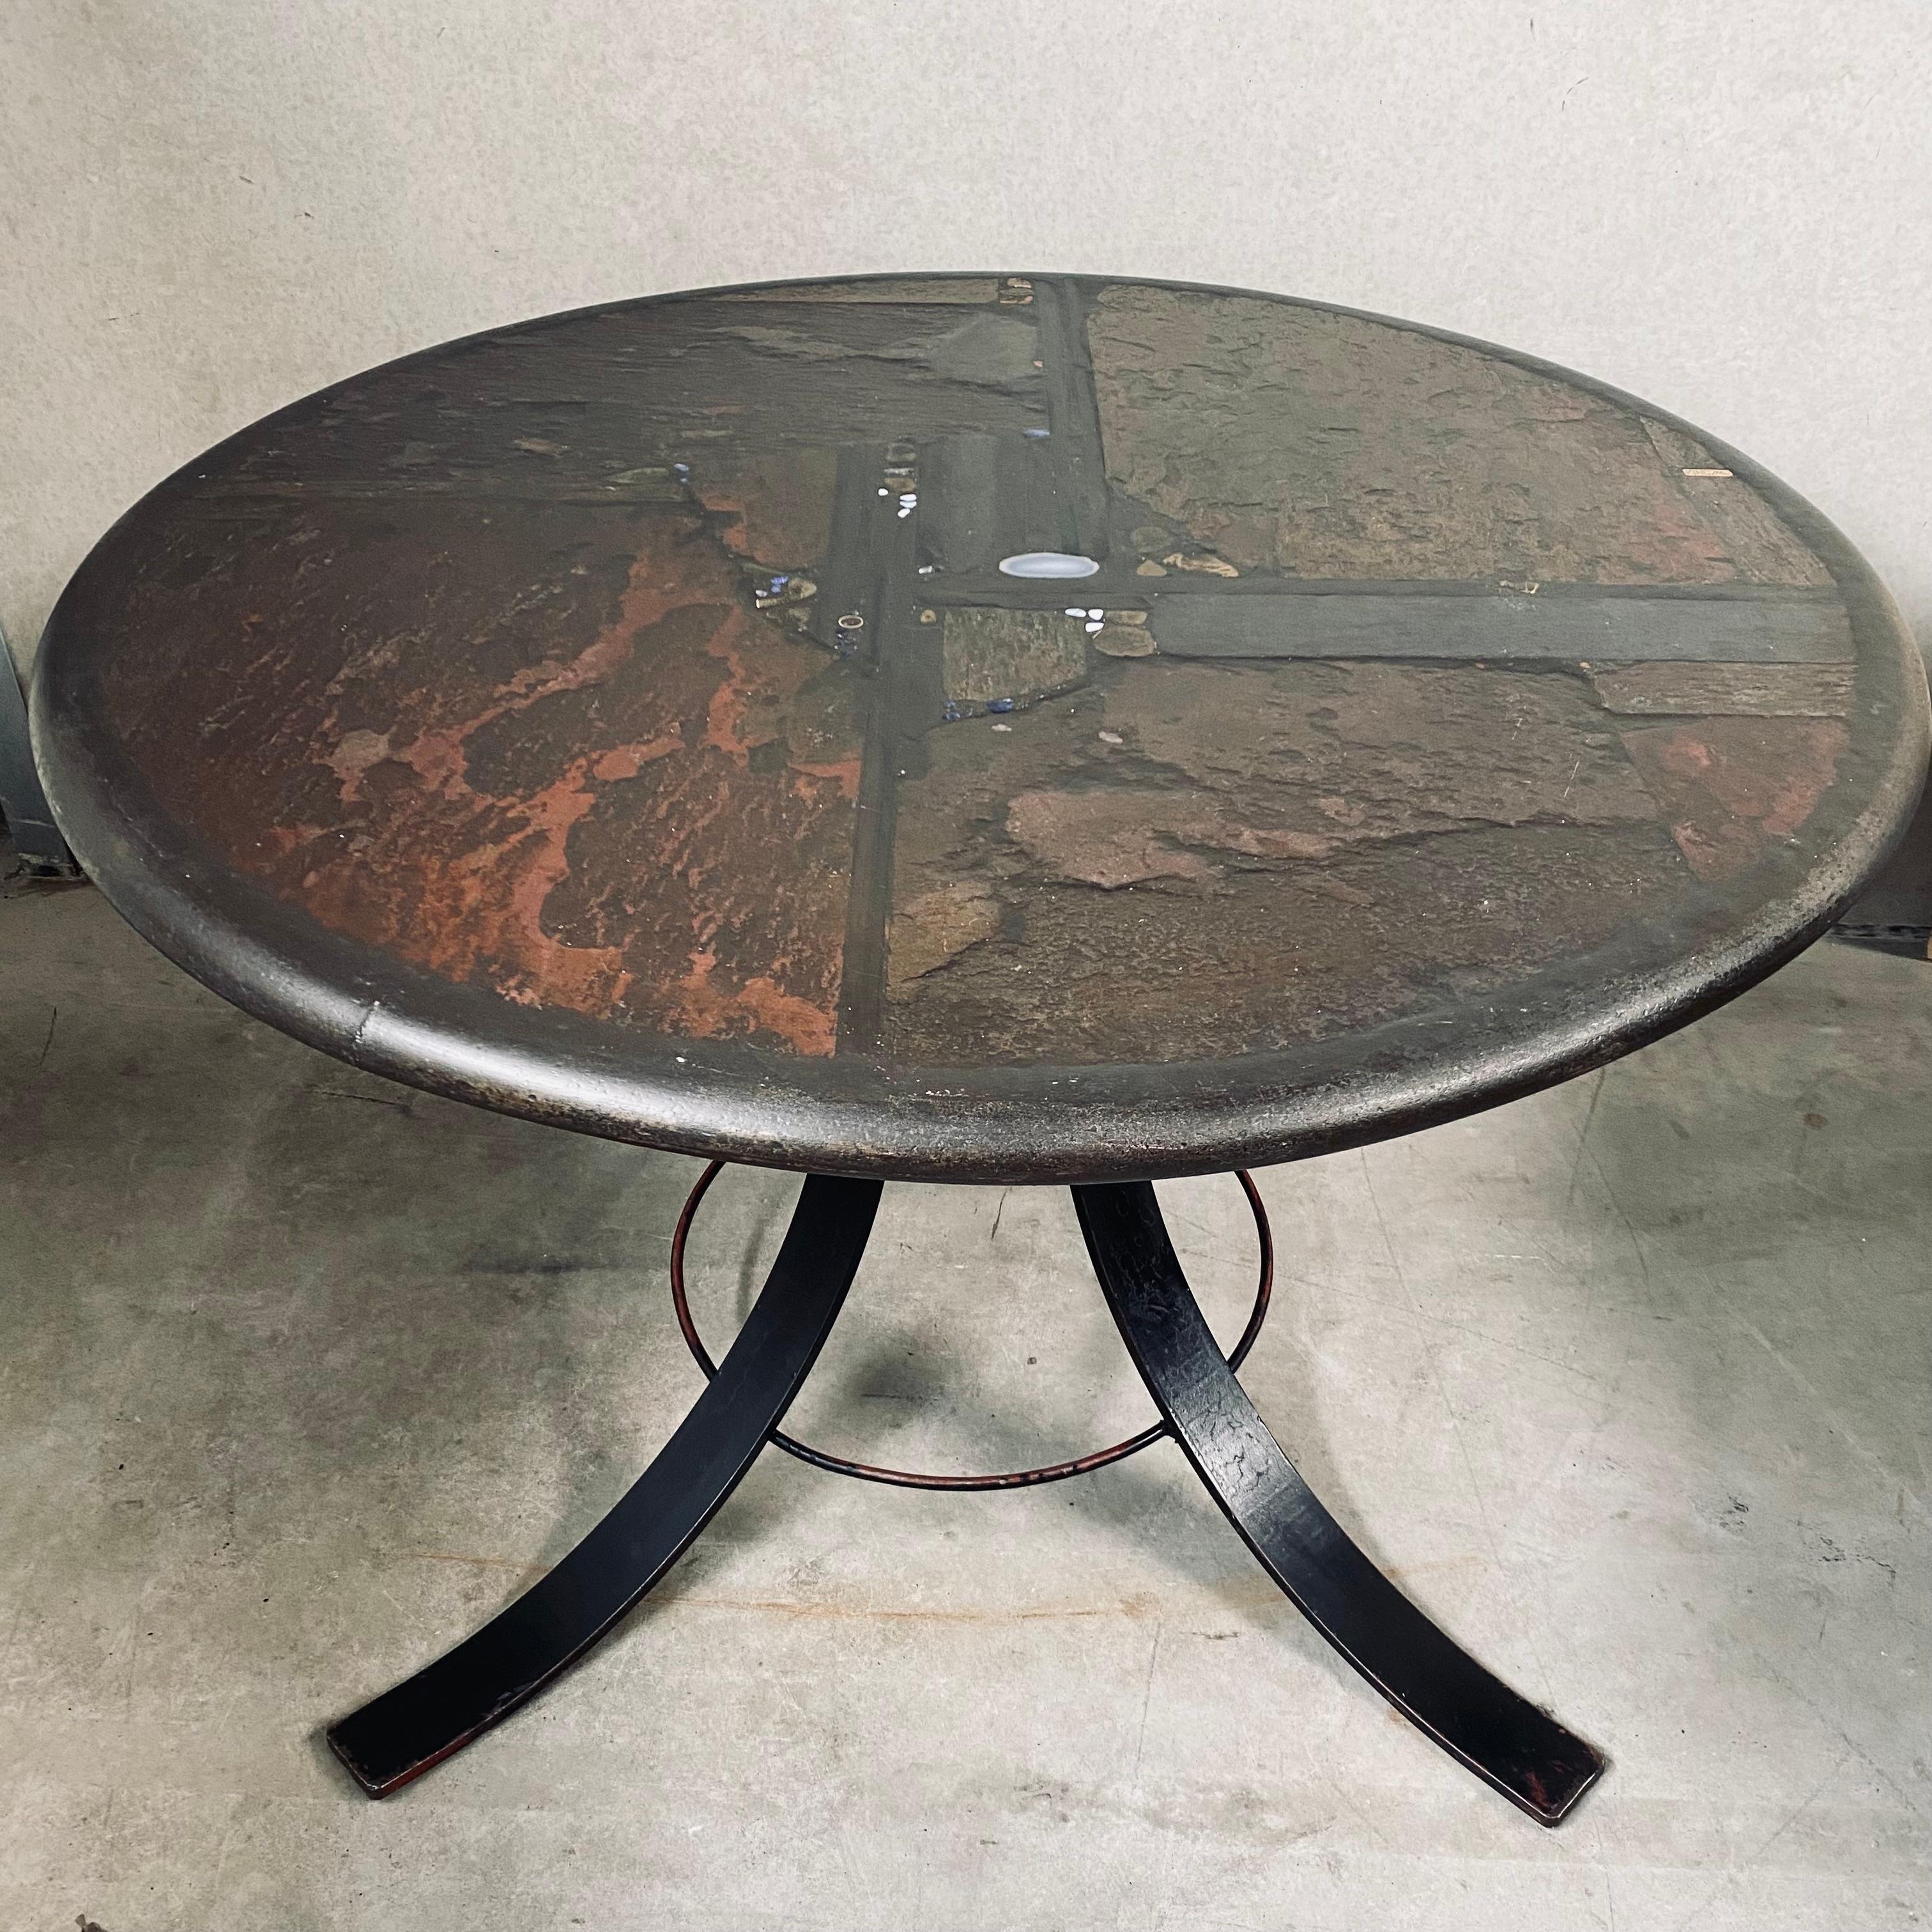 Discover the Elegance of Paul Kingma's Vintage Brutalist Round Dining Table 1980

Introducing an extraordinary piece of functional art, the Vintage Brutalist Round Dining Table with a striking cast iron black base by the renowned artist, Paul